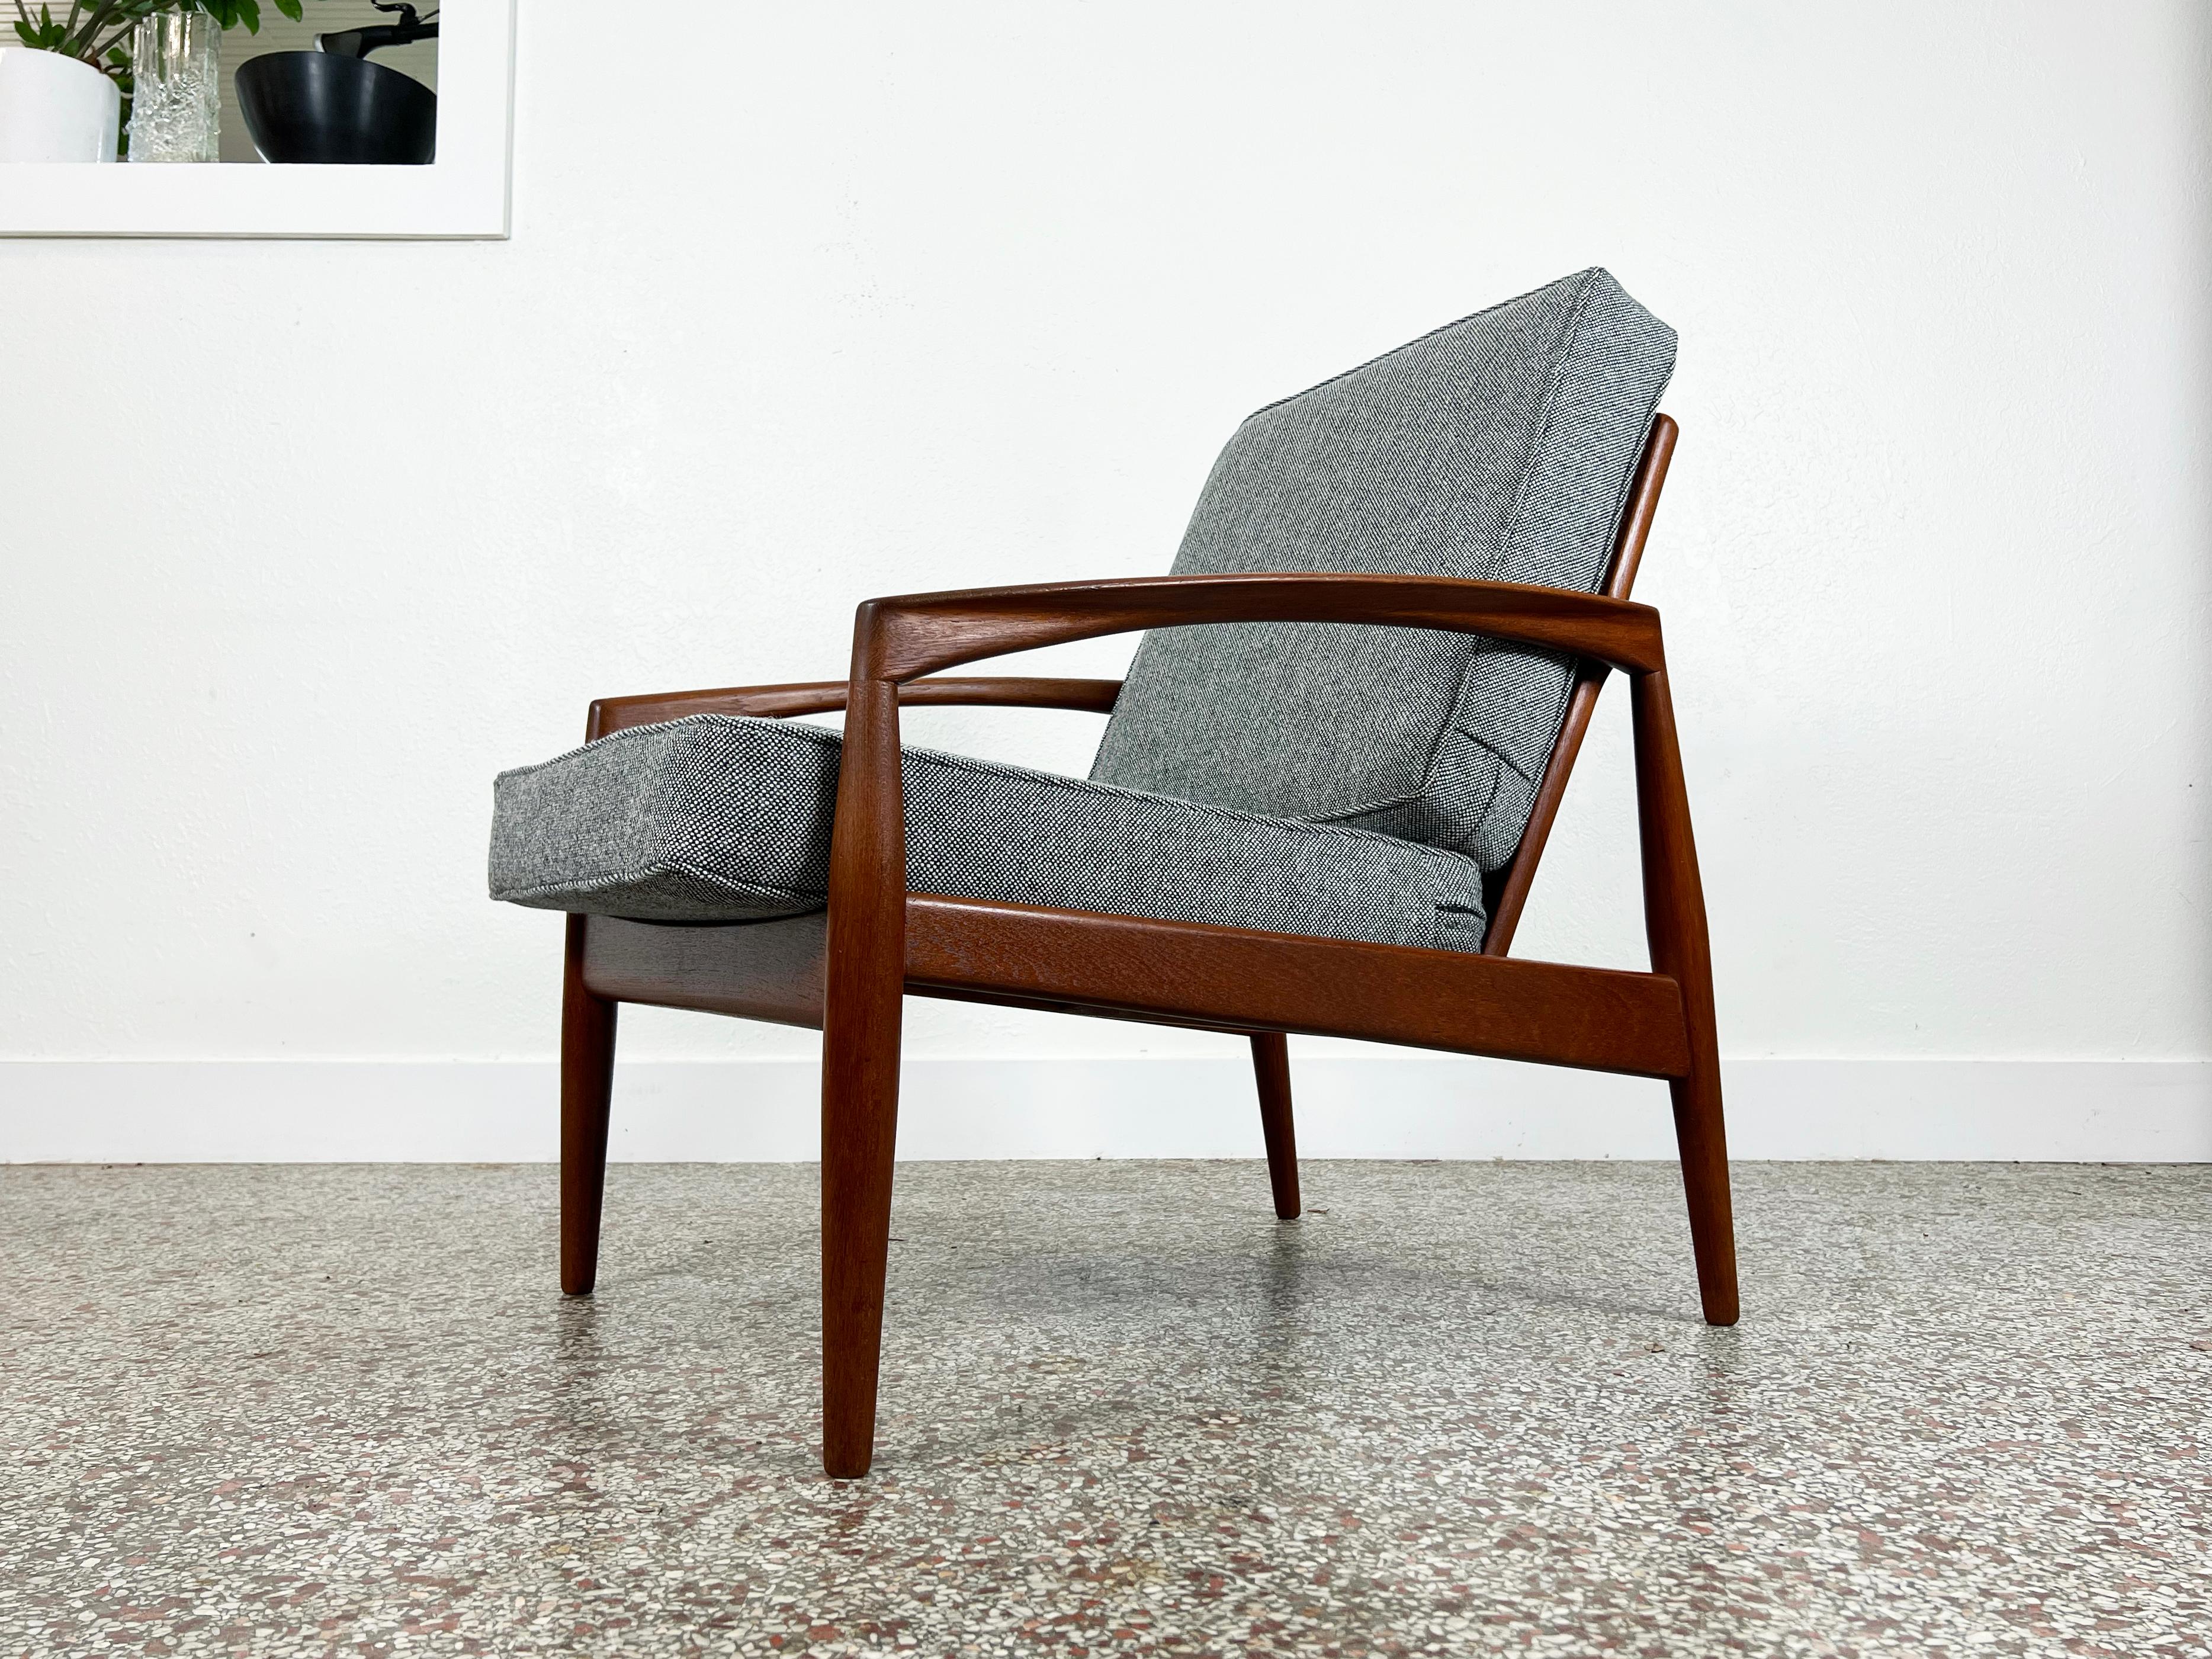 Vintage 'Paper Knife' chair in teak by Kai Kristiansen for Magnus Olesen. Cushions have been newly upholstered in a vintage grey Maharam Hallingdal wool textile by Nana Ditzel. Marked 'Made in Denmark' on frame. 

Designer: Kai